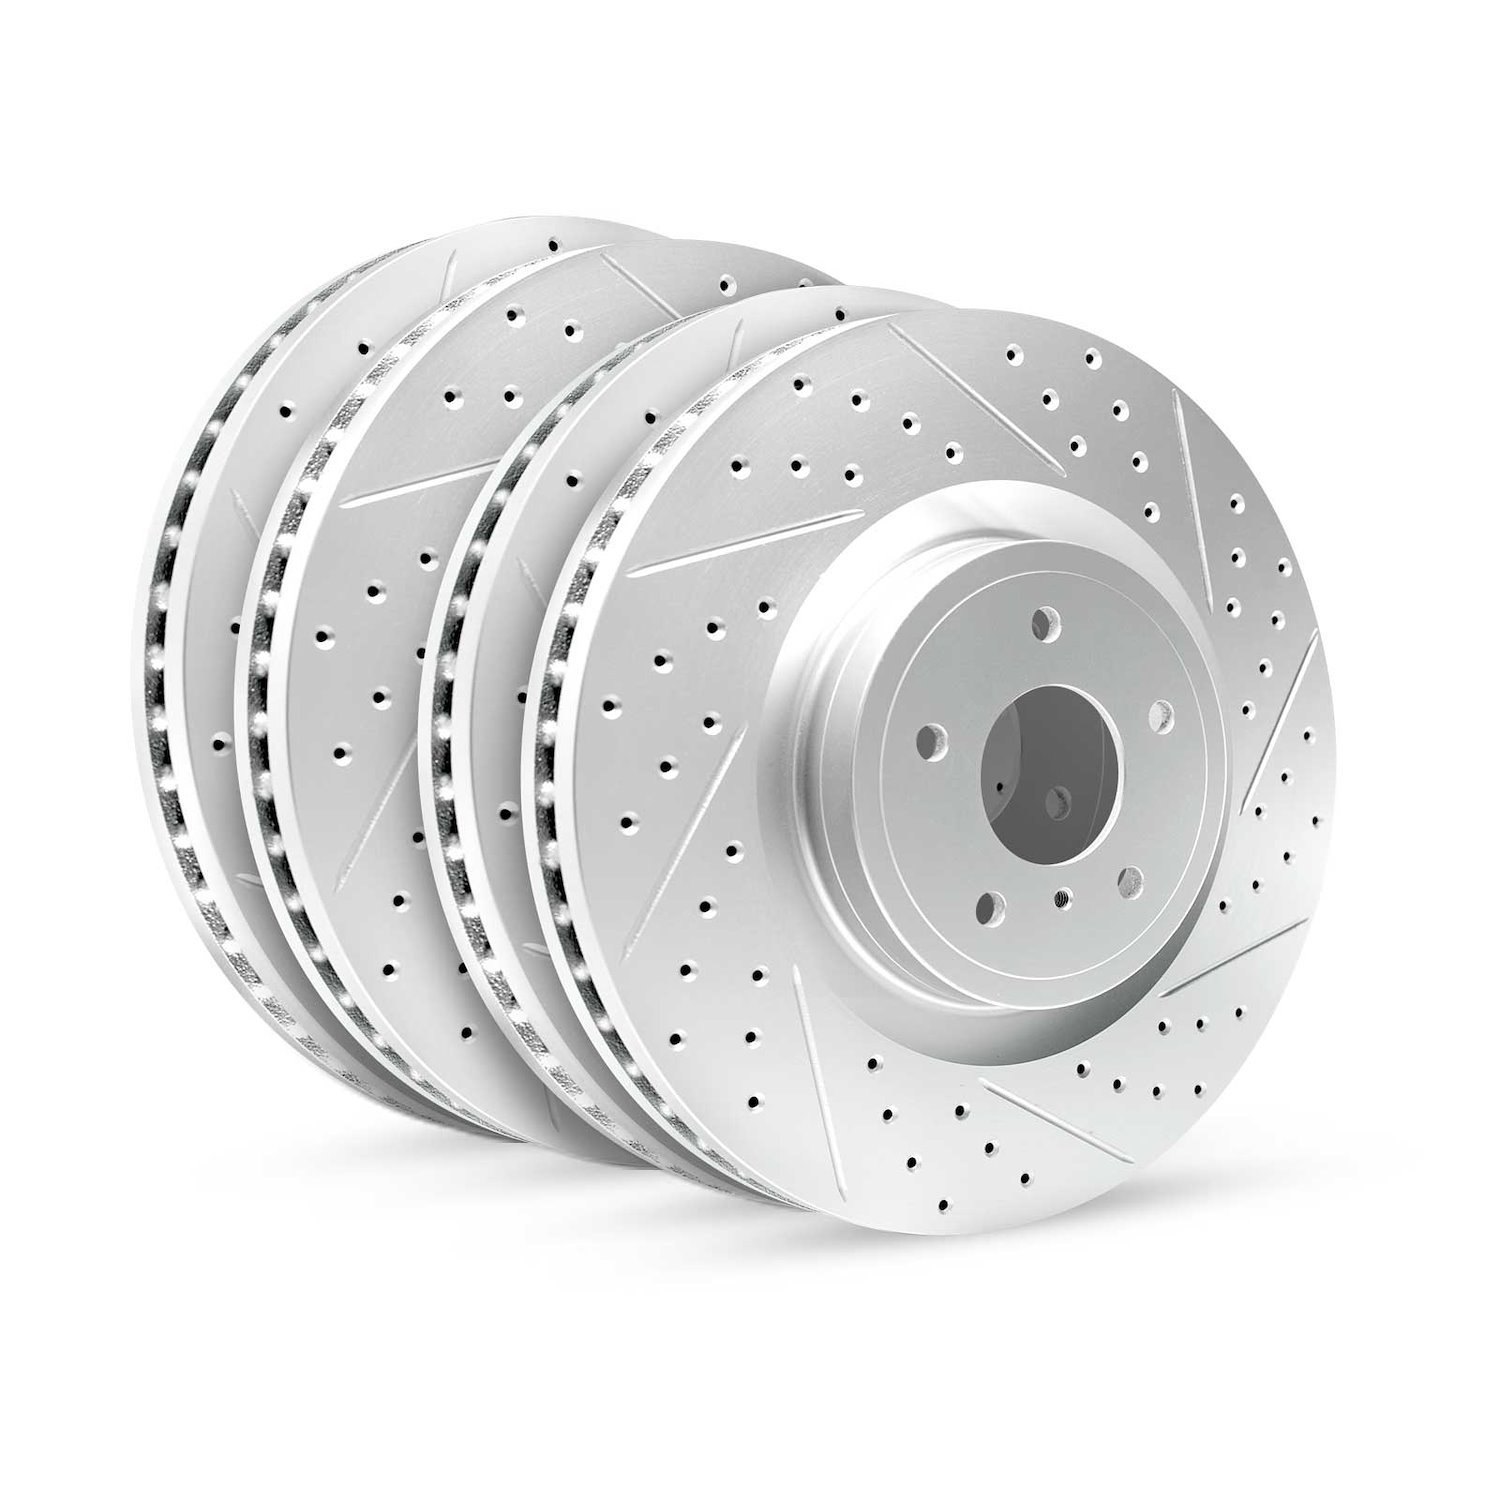 GEO-Carbon Drilled/Slotted Rotors, 2005-2014 Ford/Mazda,